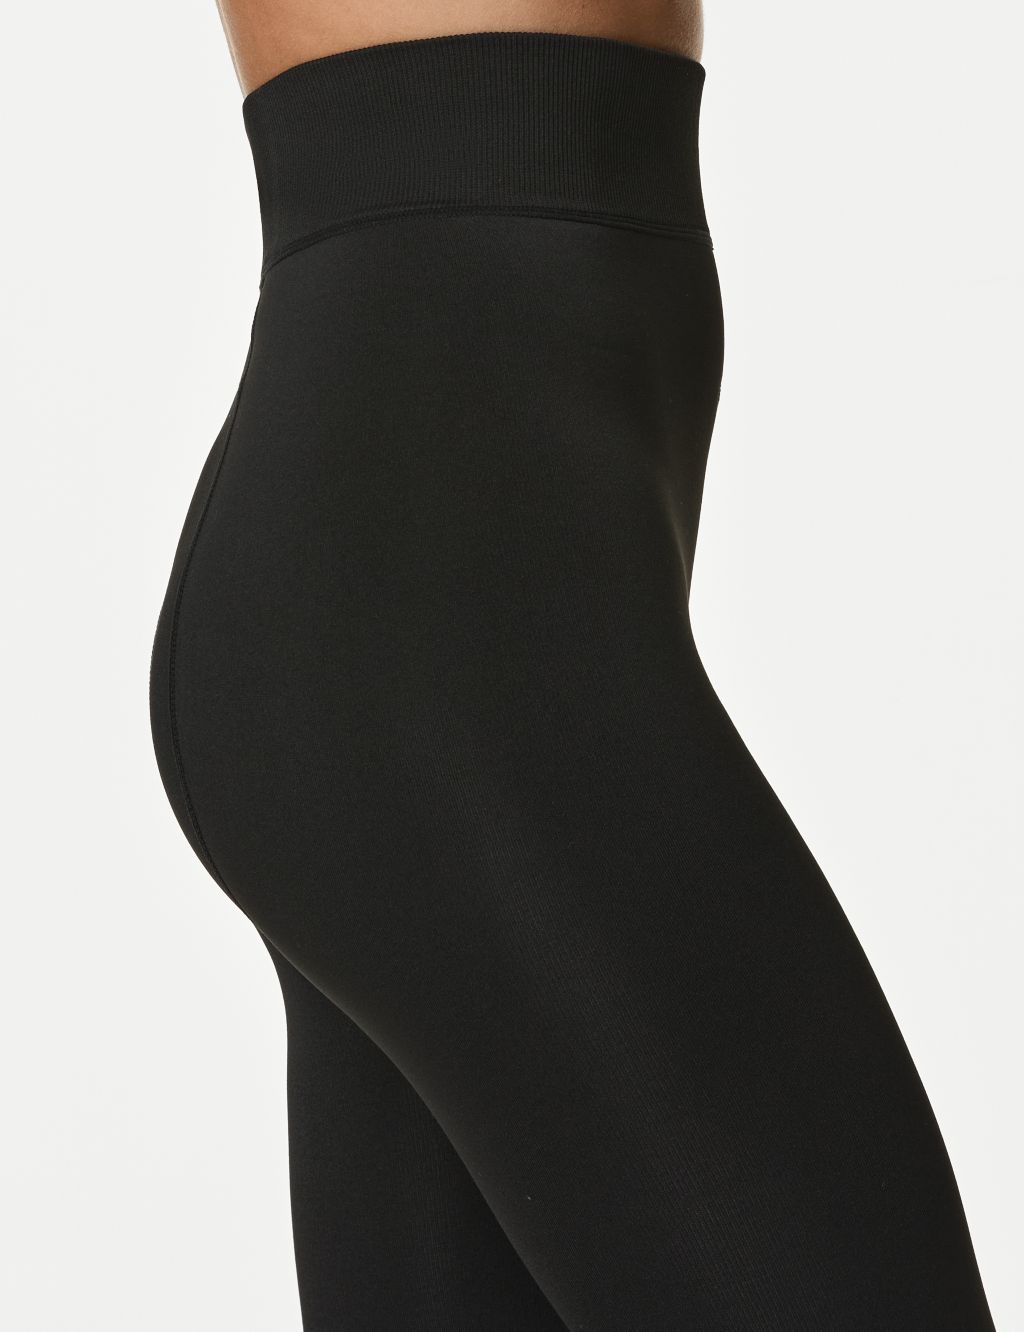 M&S £8 fleece-lined tights have 300 5-star reviews as shoppers